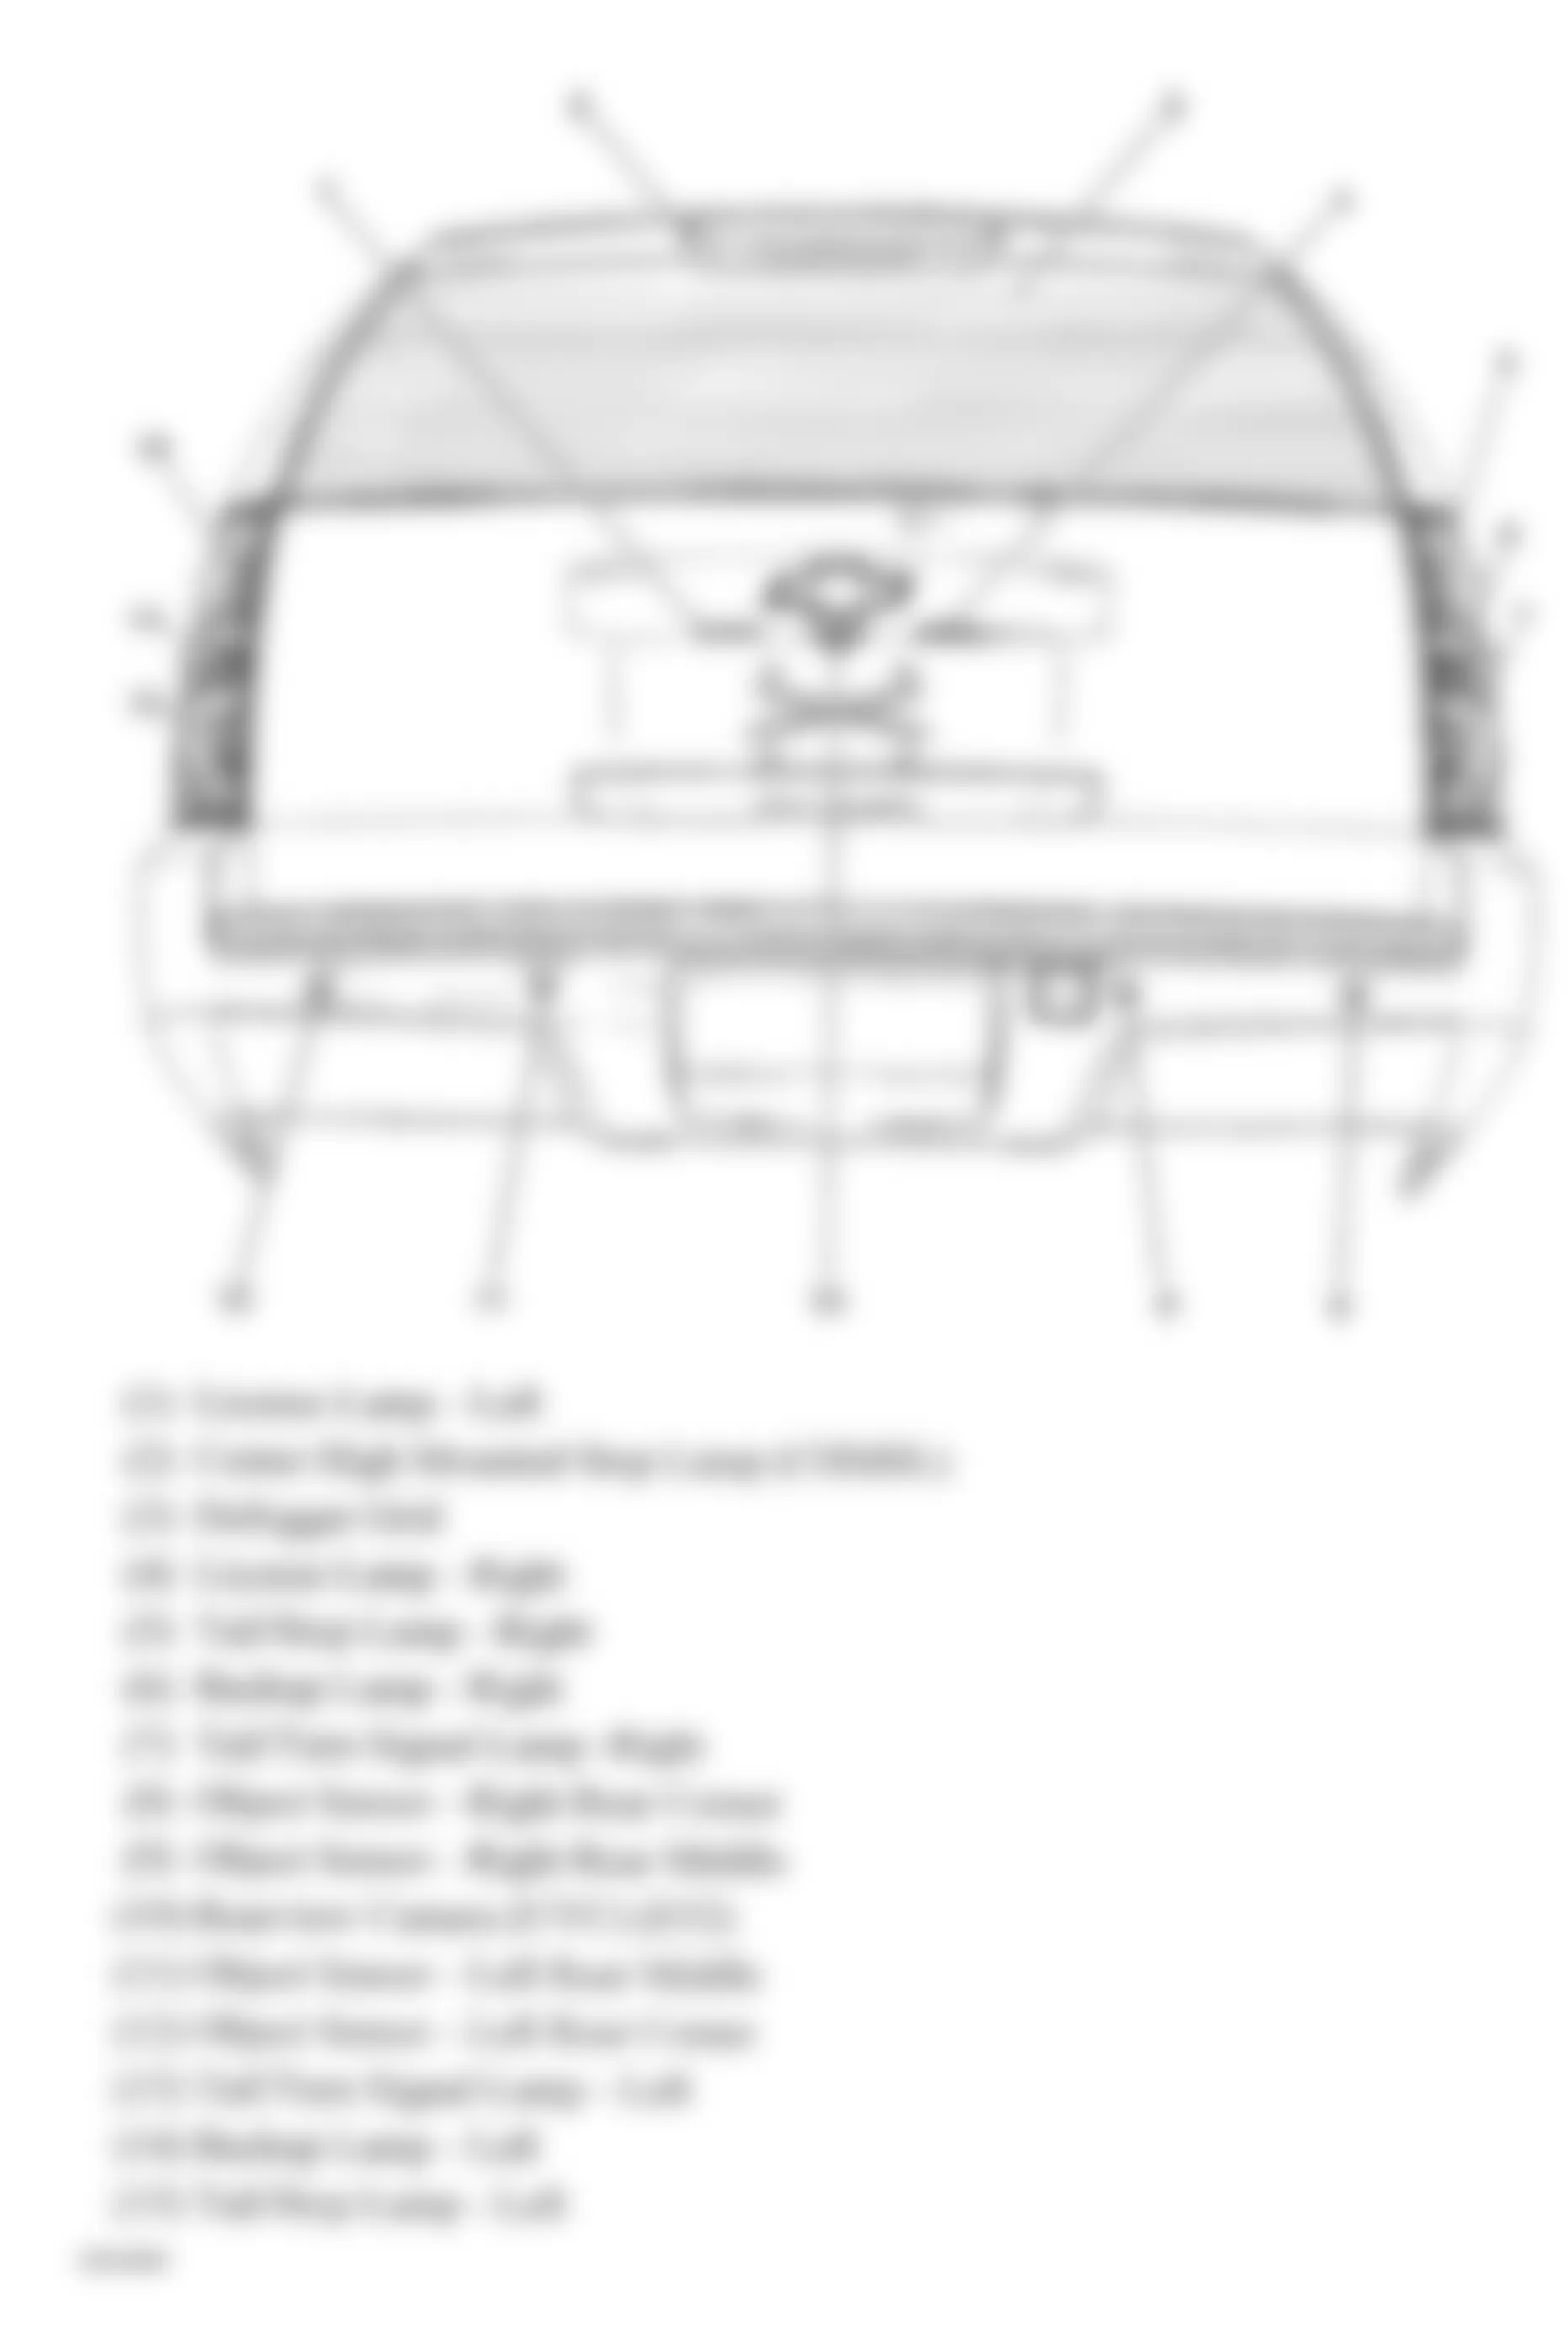 Chevrolet Tahoe 2009 - Component Locations -  Rear Of Vehicle (Avalanche, Suburban & Tahoe W/One Piece Liftgate)